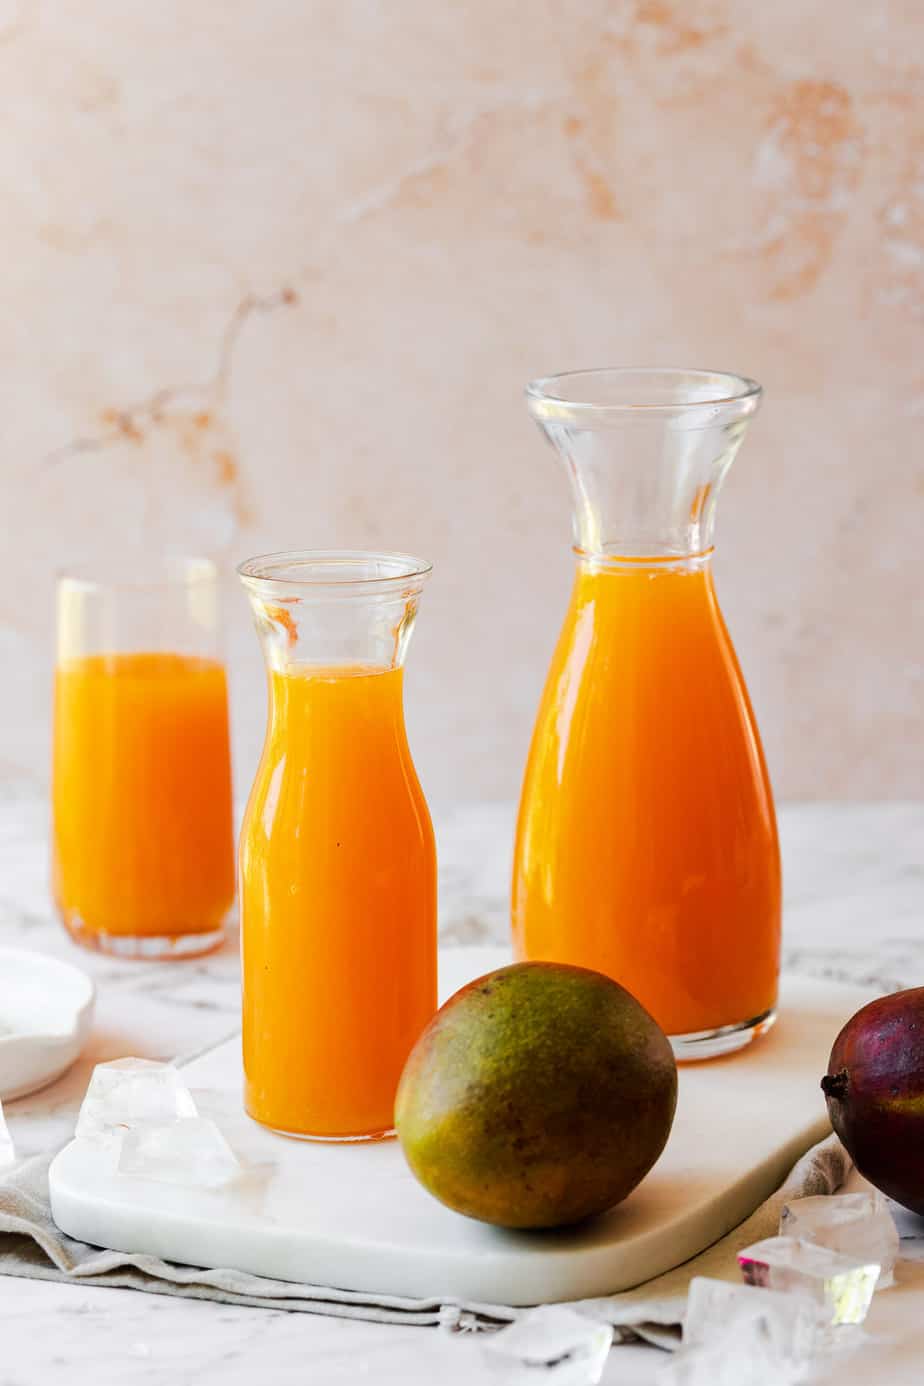 three jugs filled with mango nectar and a fresh whole mango on marble